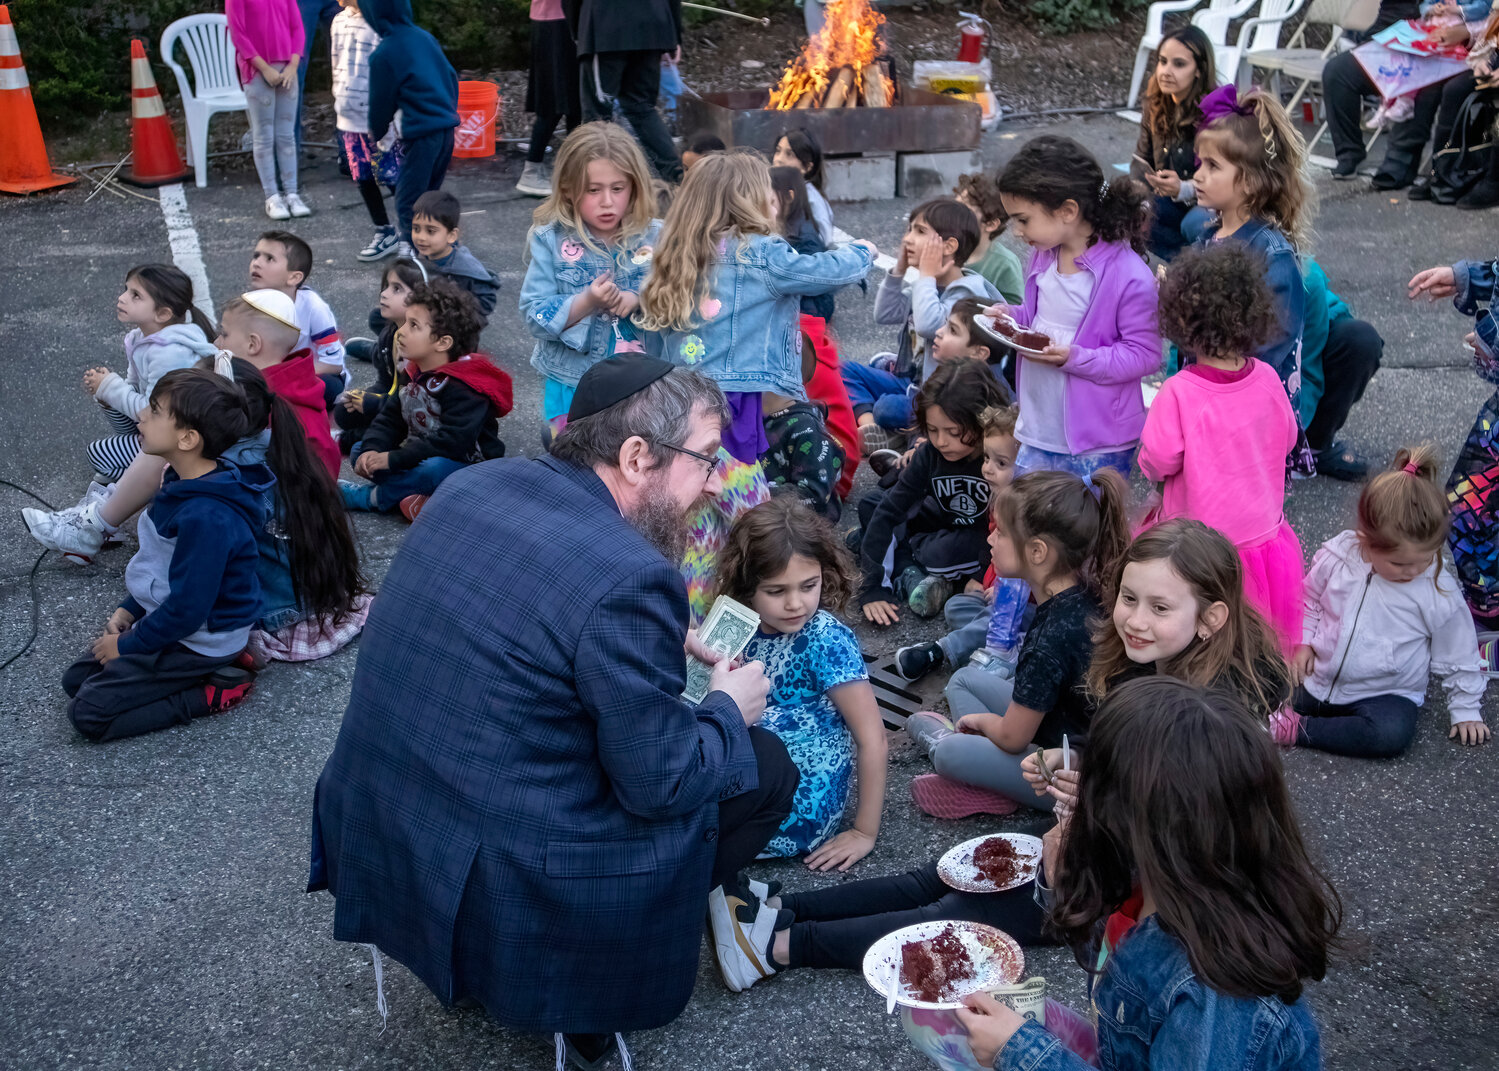 Rabbi Shimon Kramer, near left, director of the Chabad Center, met with some of the children who were both learning about Lag B’Omer and celebrating the holiday.